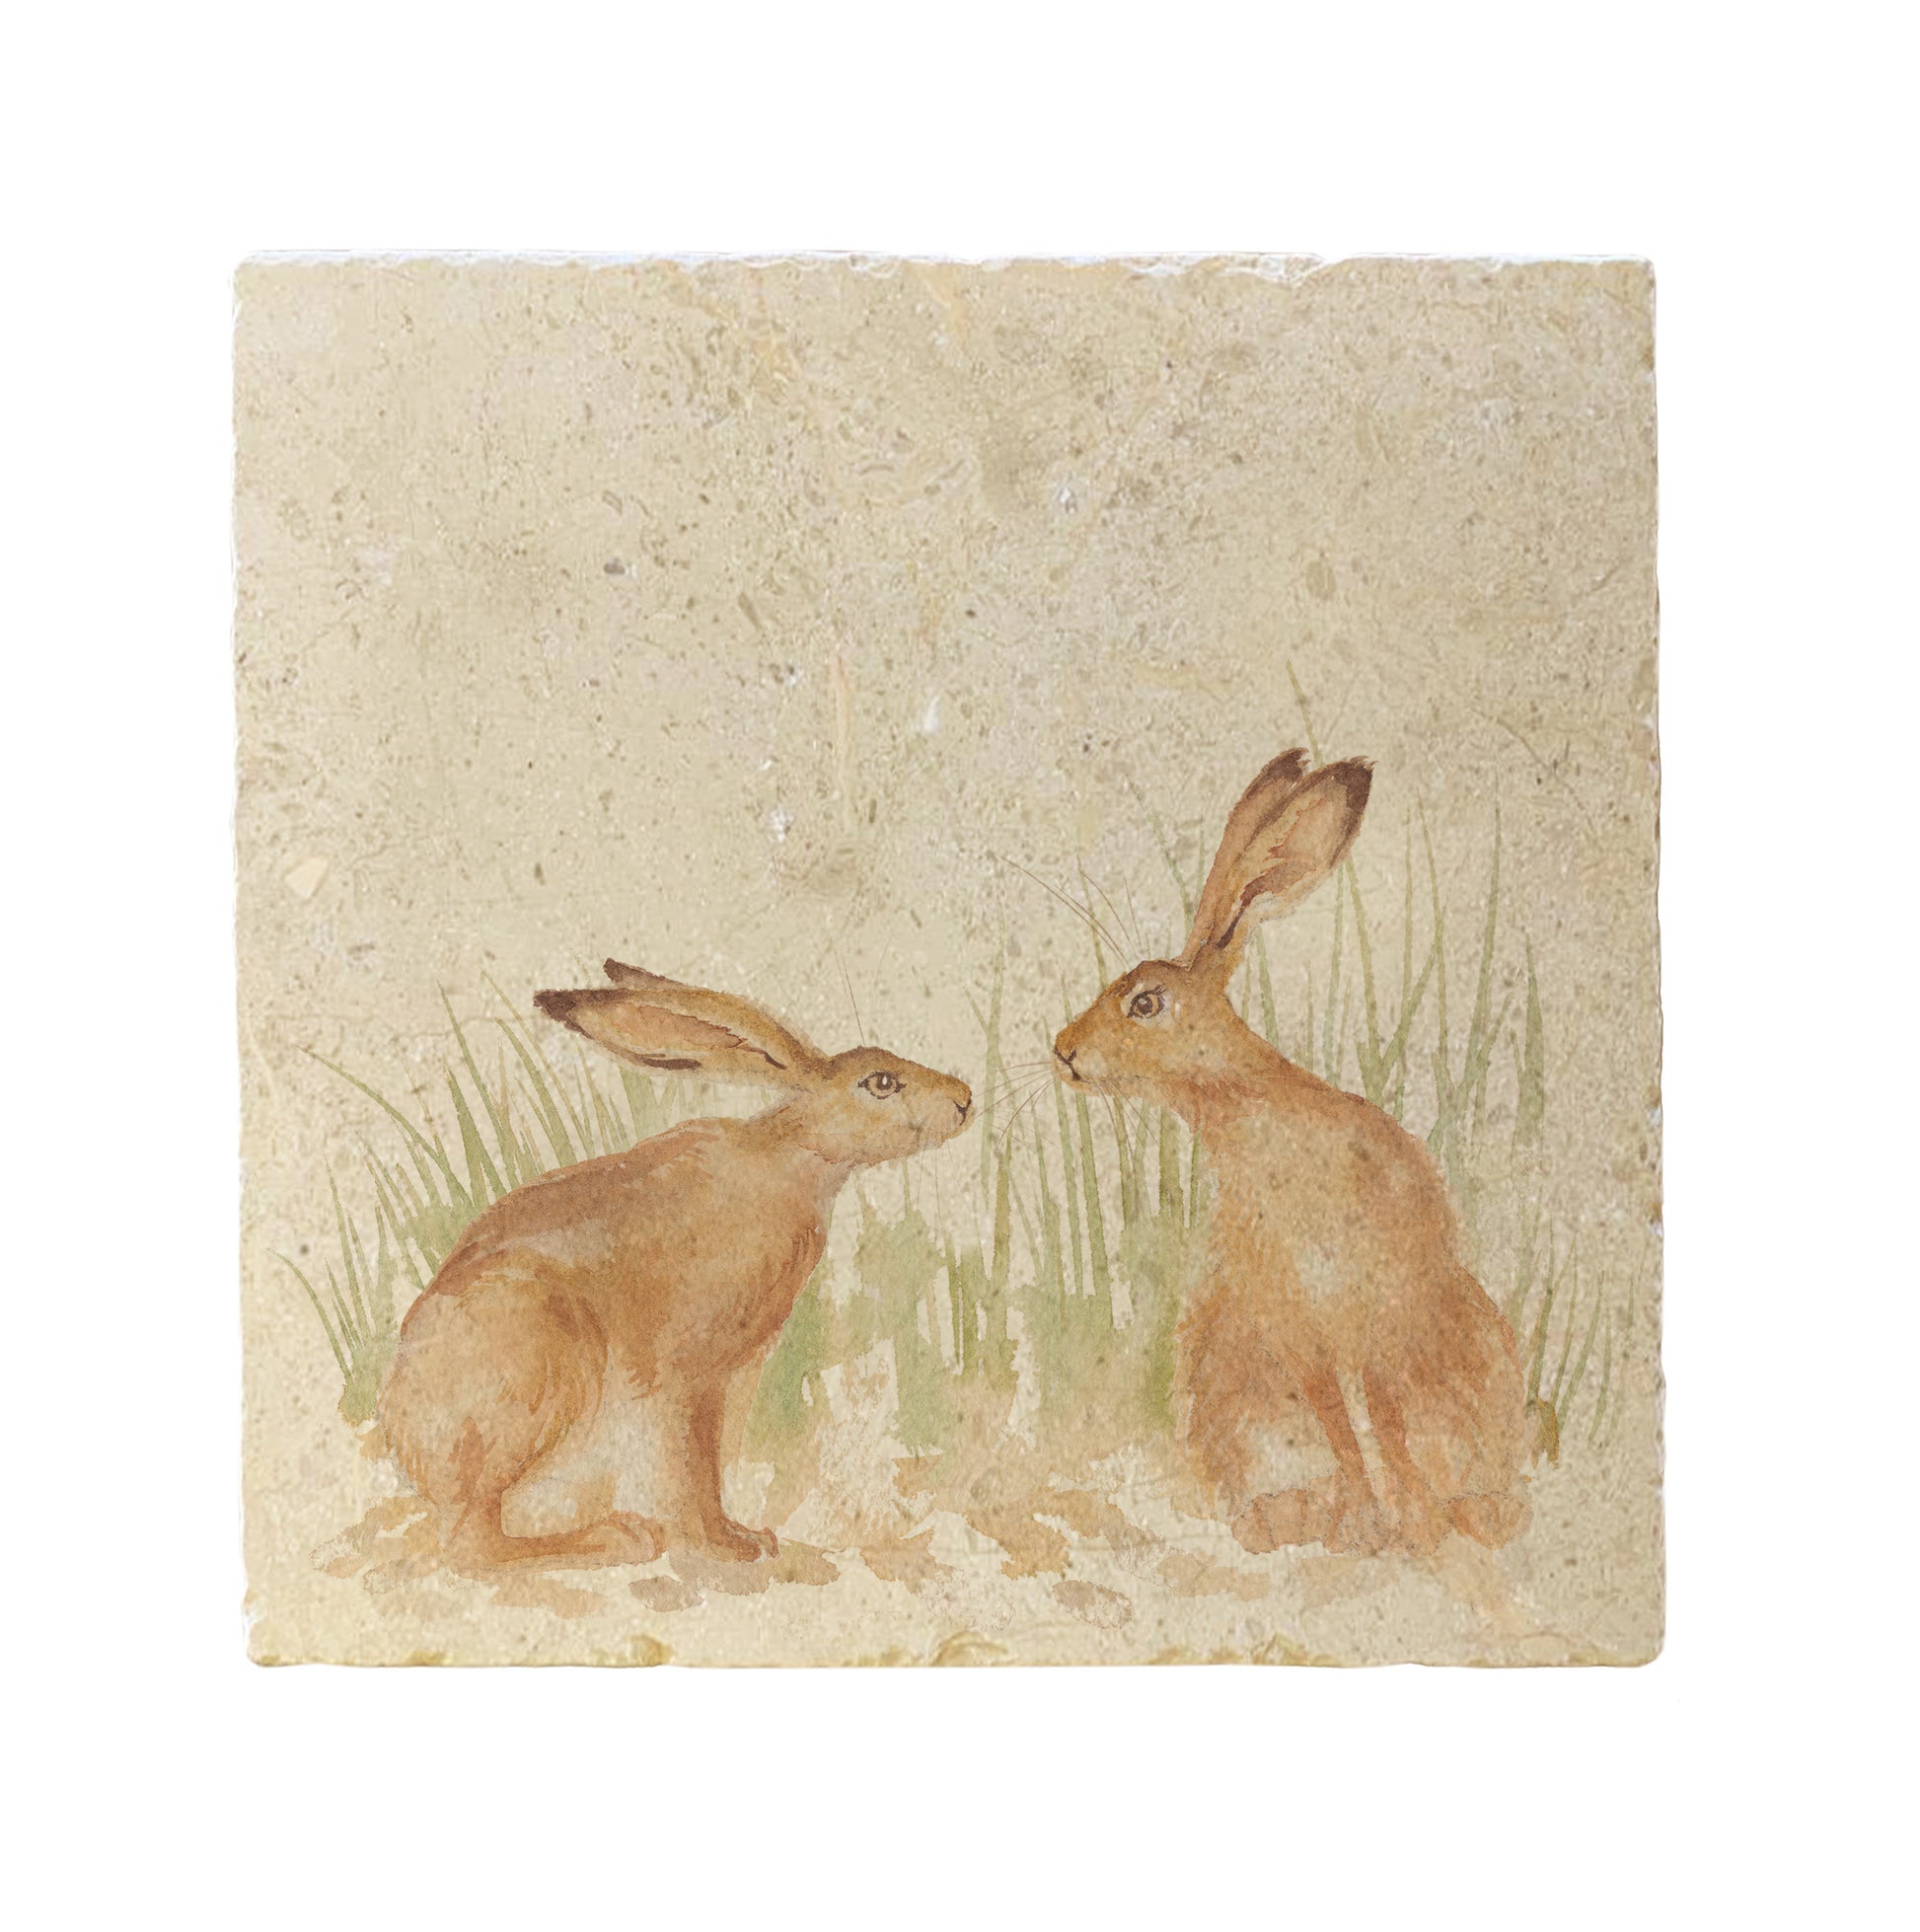 A large square cream multipurpose marble platter, featuring a watercolour design of two hares facing each other about to touch noses.